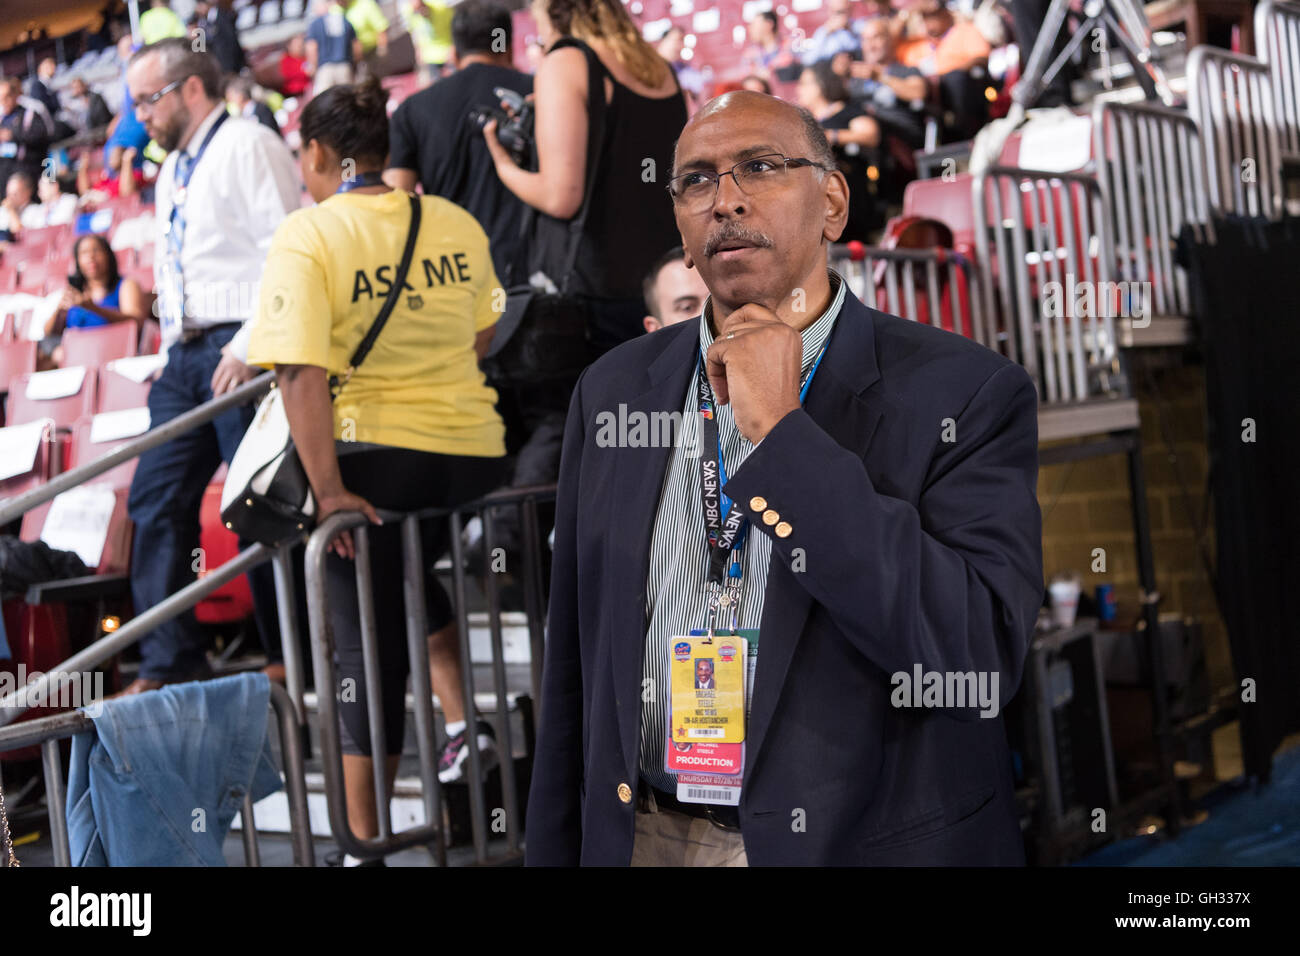 Former chairman of the Republican Party Michael Steele views the scene on the delegate floor before the start of the final day of the Democratic National Convention at the Wells Fargo Center July 28, 2016 in Philadelphia, Pennsylvania. Stock Photo